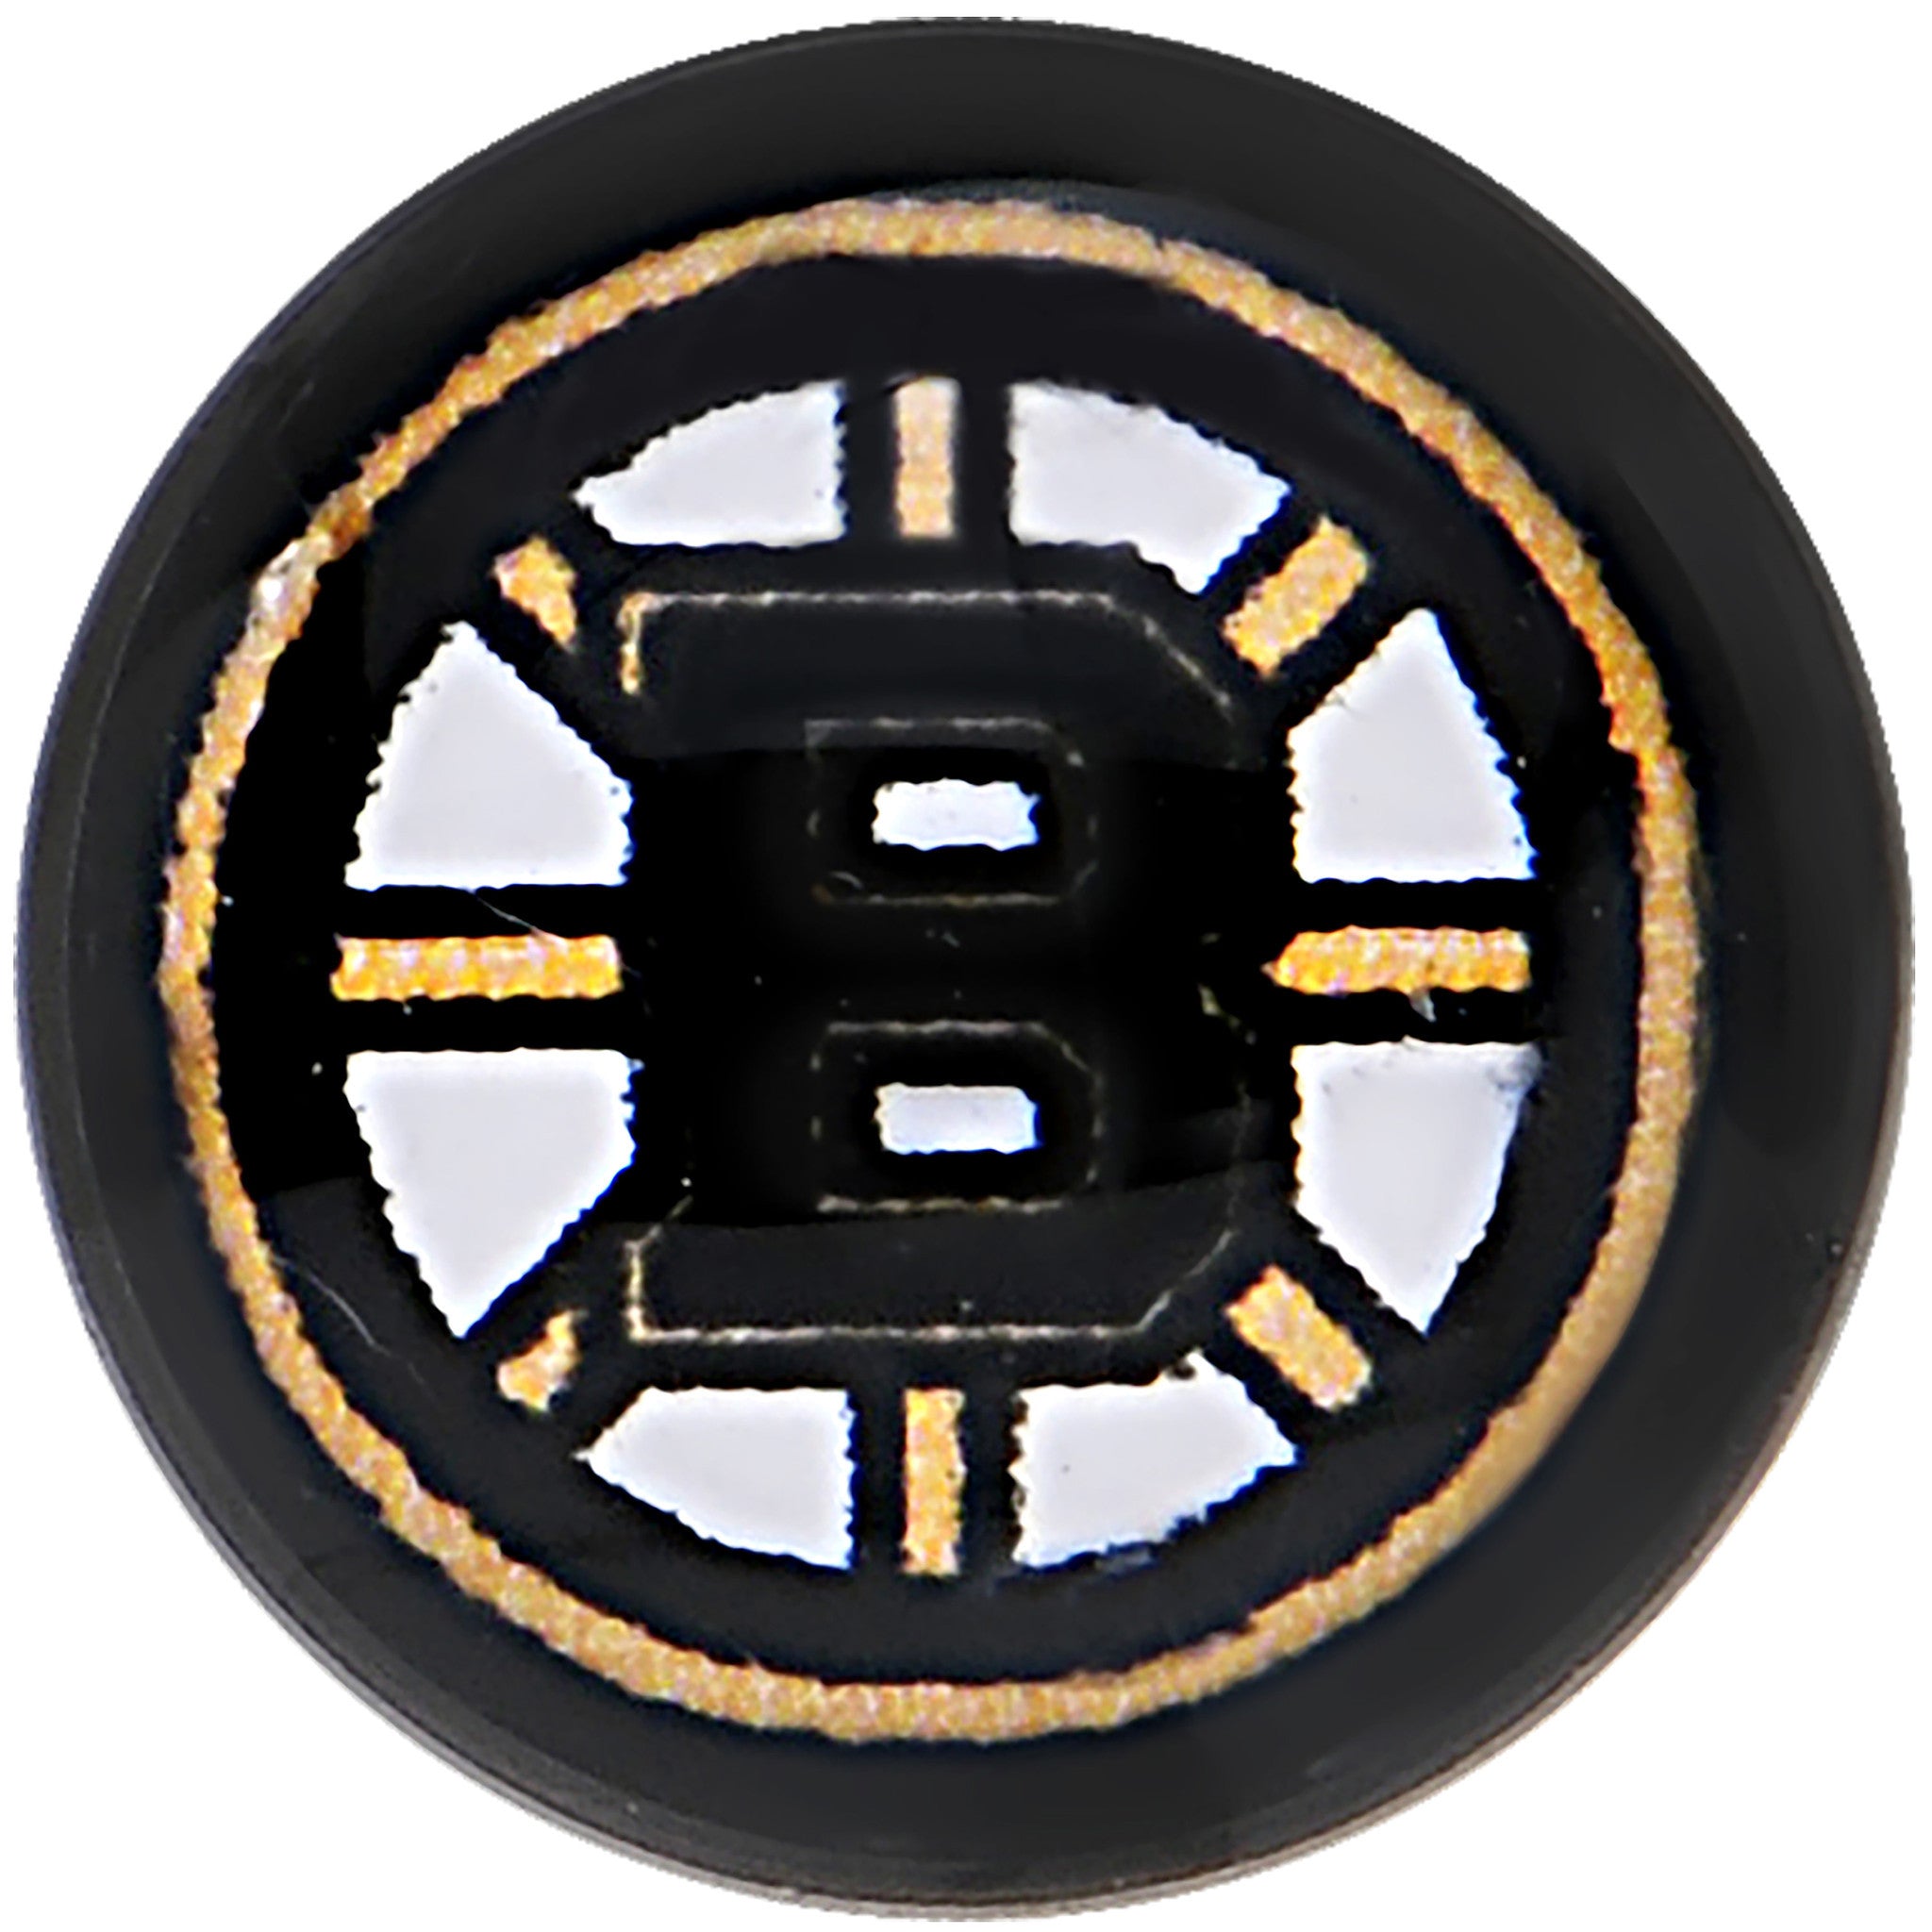 Officially Licensed NHL Boston Bruins Logo Tongue Ring